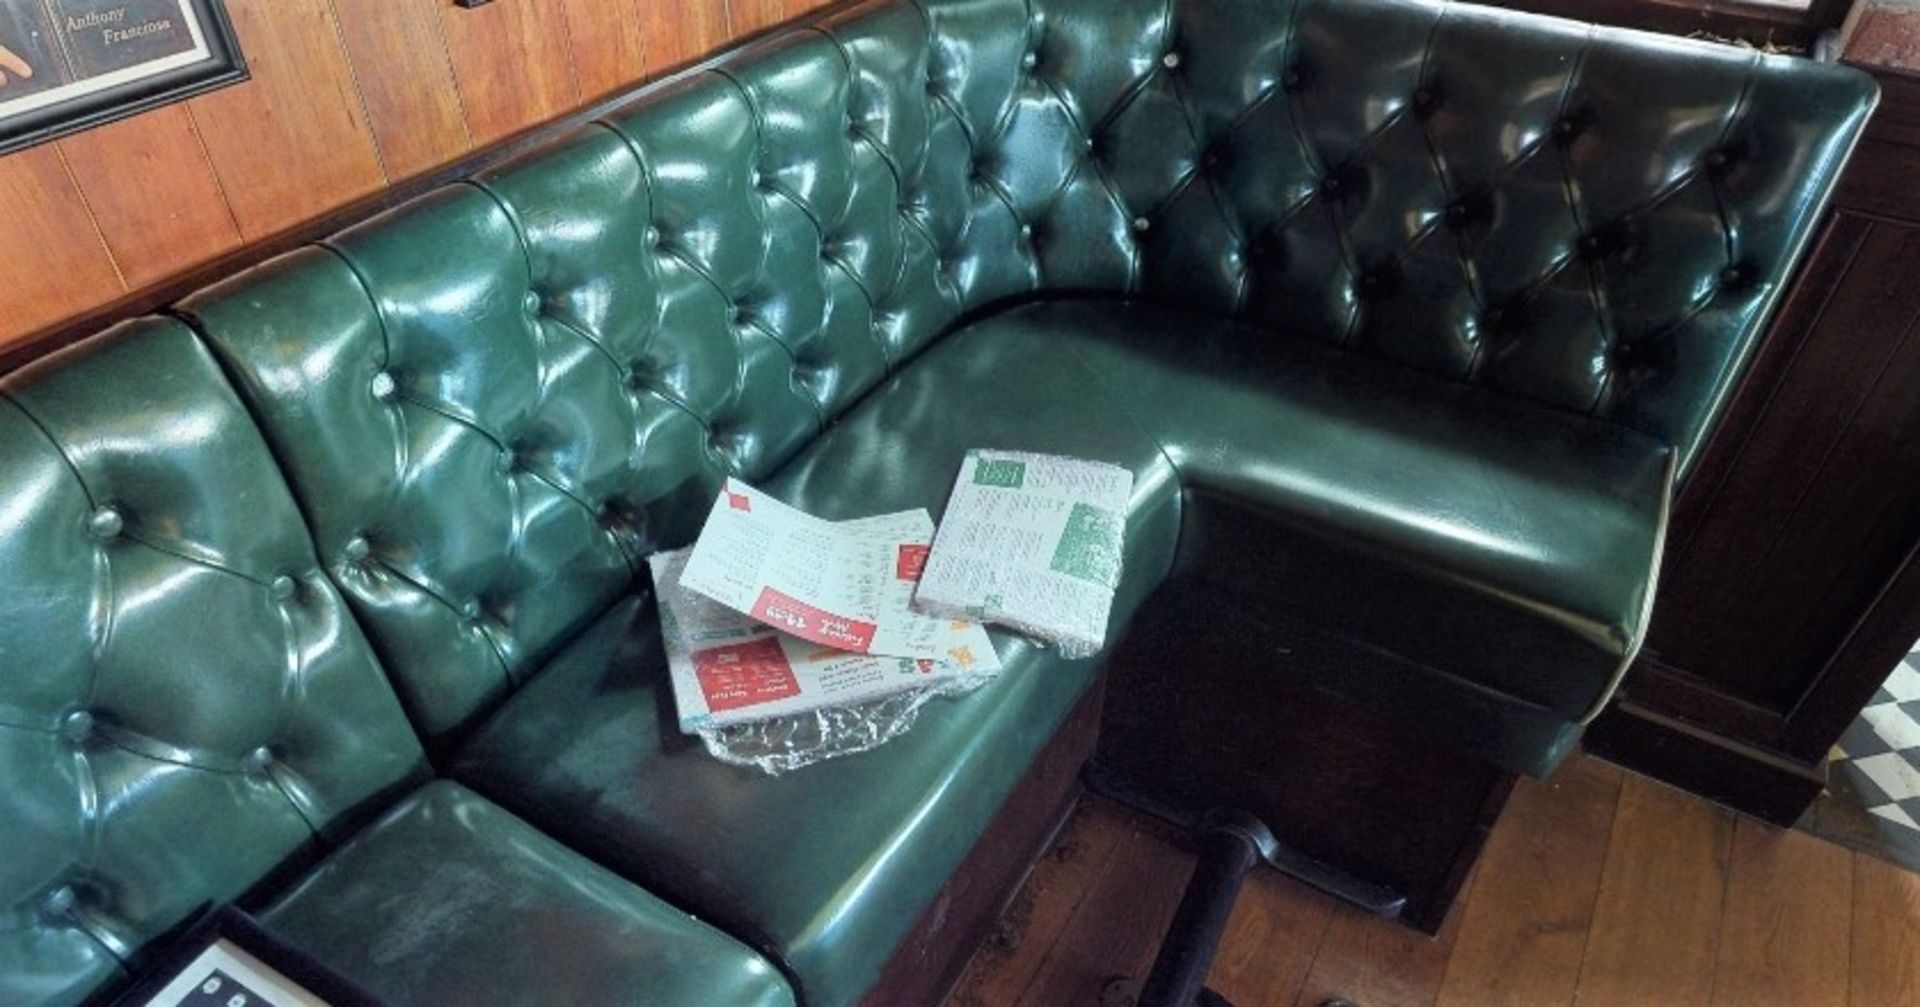 1 x Restaurant Tall Seating Booth - Retro 1950's American Diner Style With Regency Green Upholstery, - Image 3 of 5